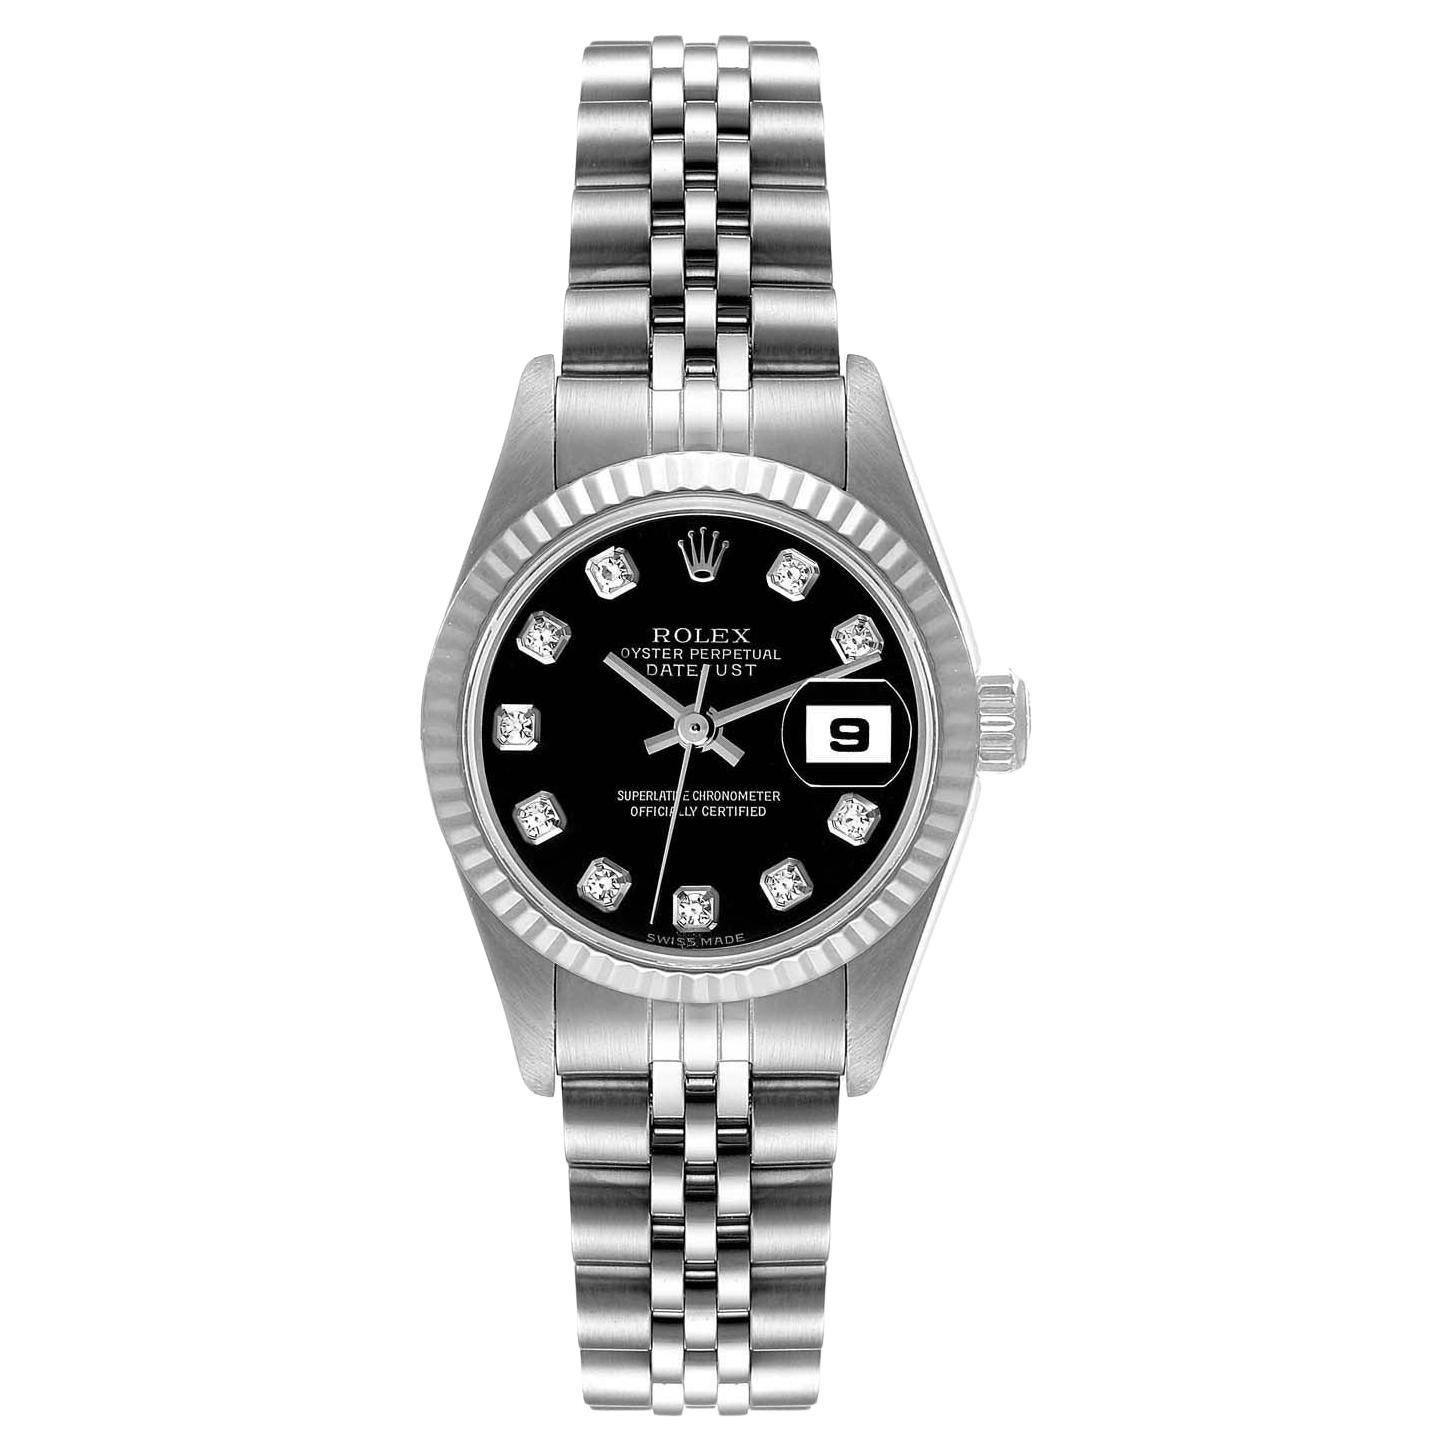 Rolex Lady-Datejust 26mm Steel White Gold Black Diamond Dial Ladies Watch 79174 For Sale